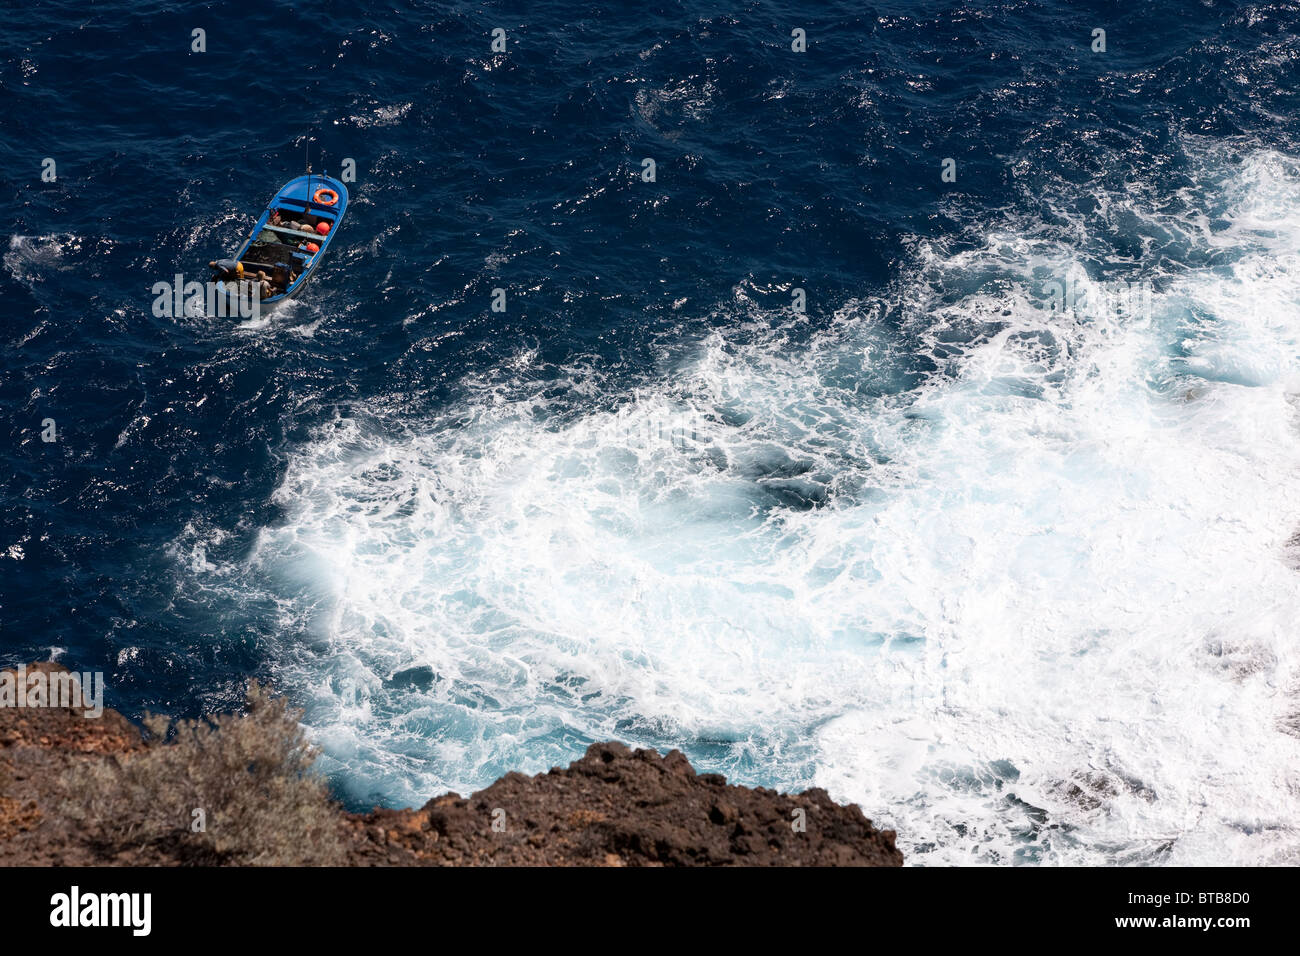 Fishing boat in ocean of rough seas and white water close to rocks. Stock Photo